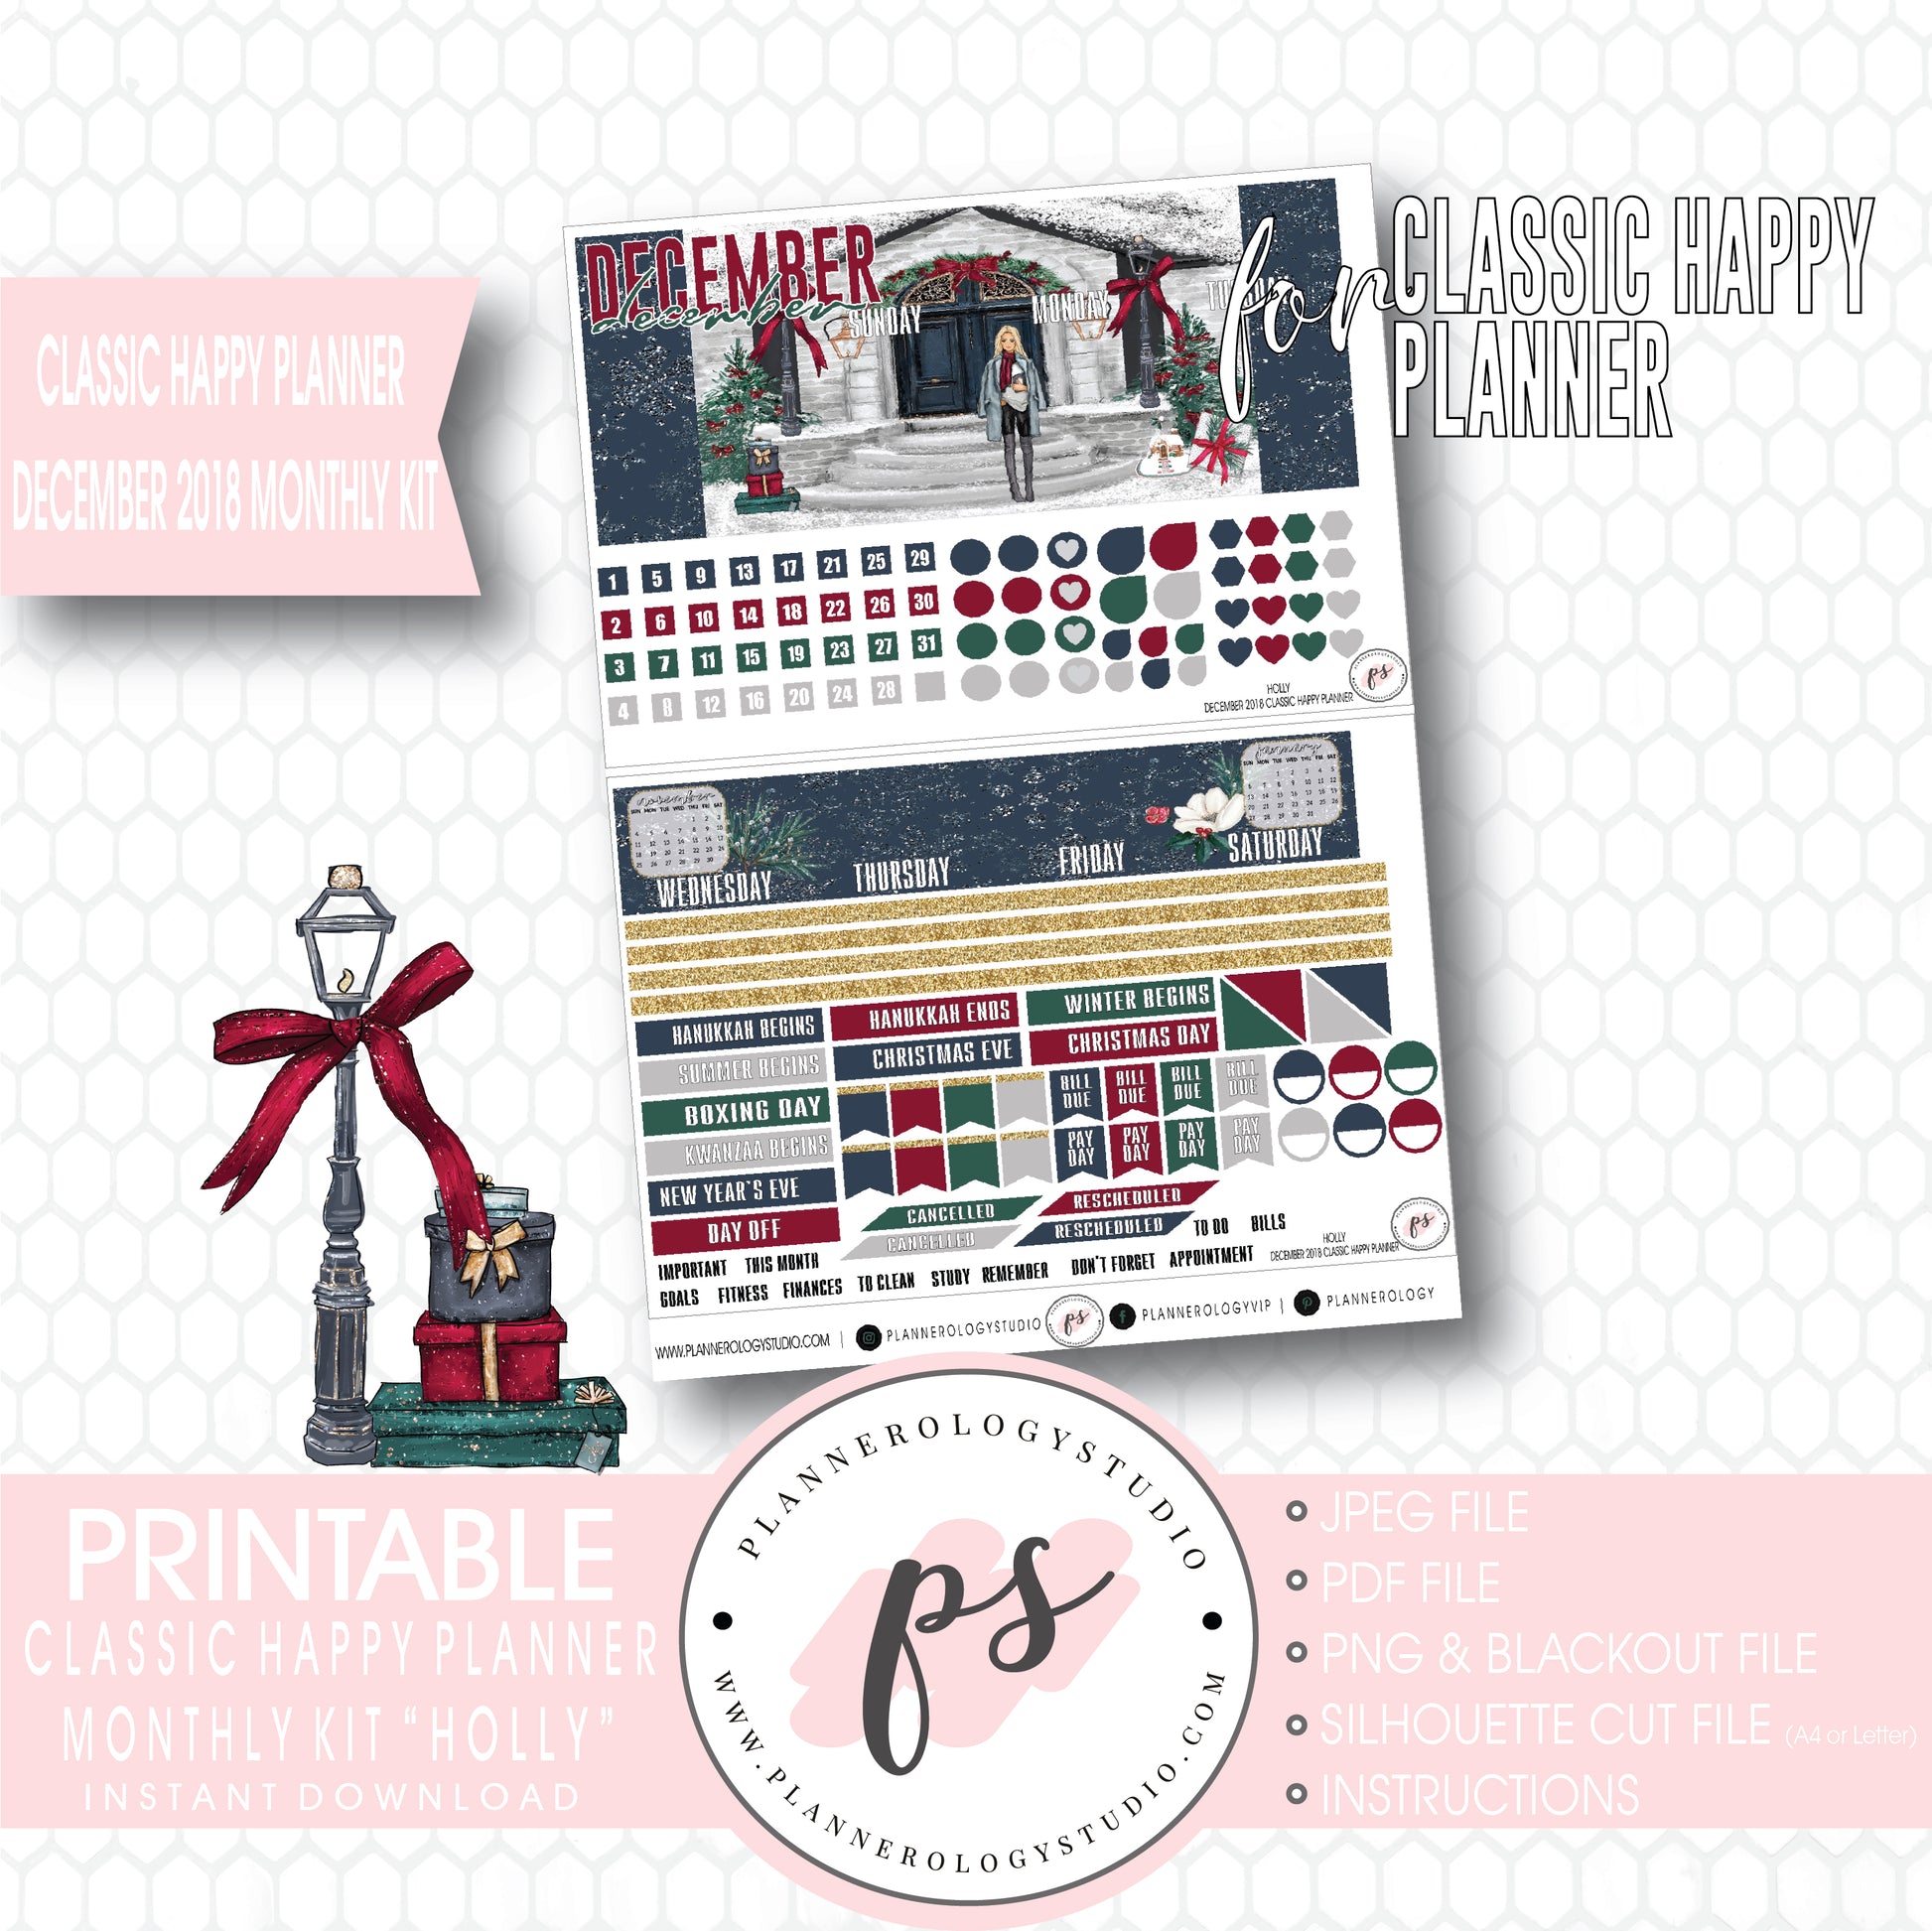 Holly Christmas December 2018 Monthly View Kit Digital Printable Planner Stickers (for use with Classic Happy Planner) - Plannerologystudio